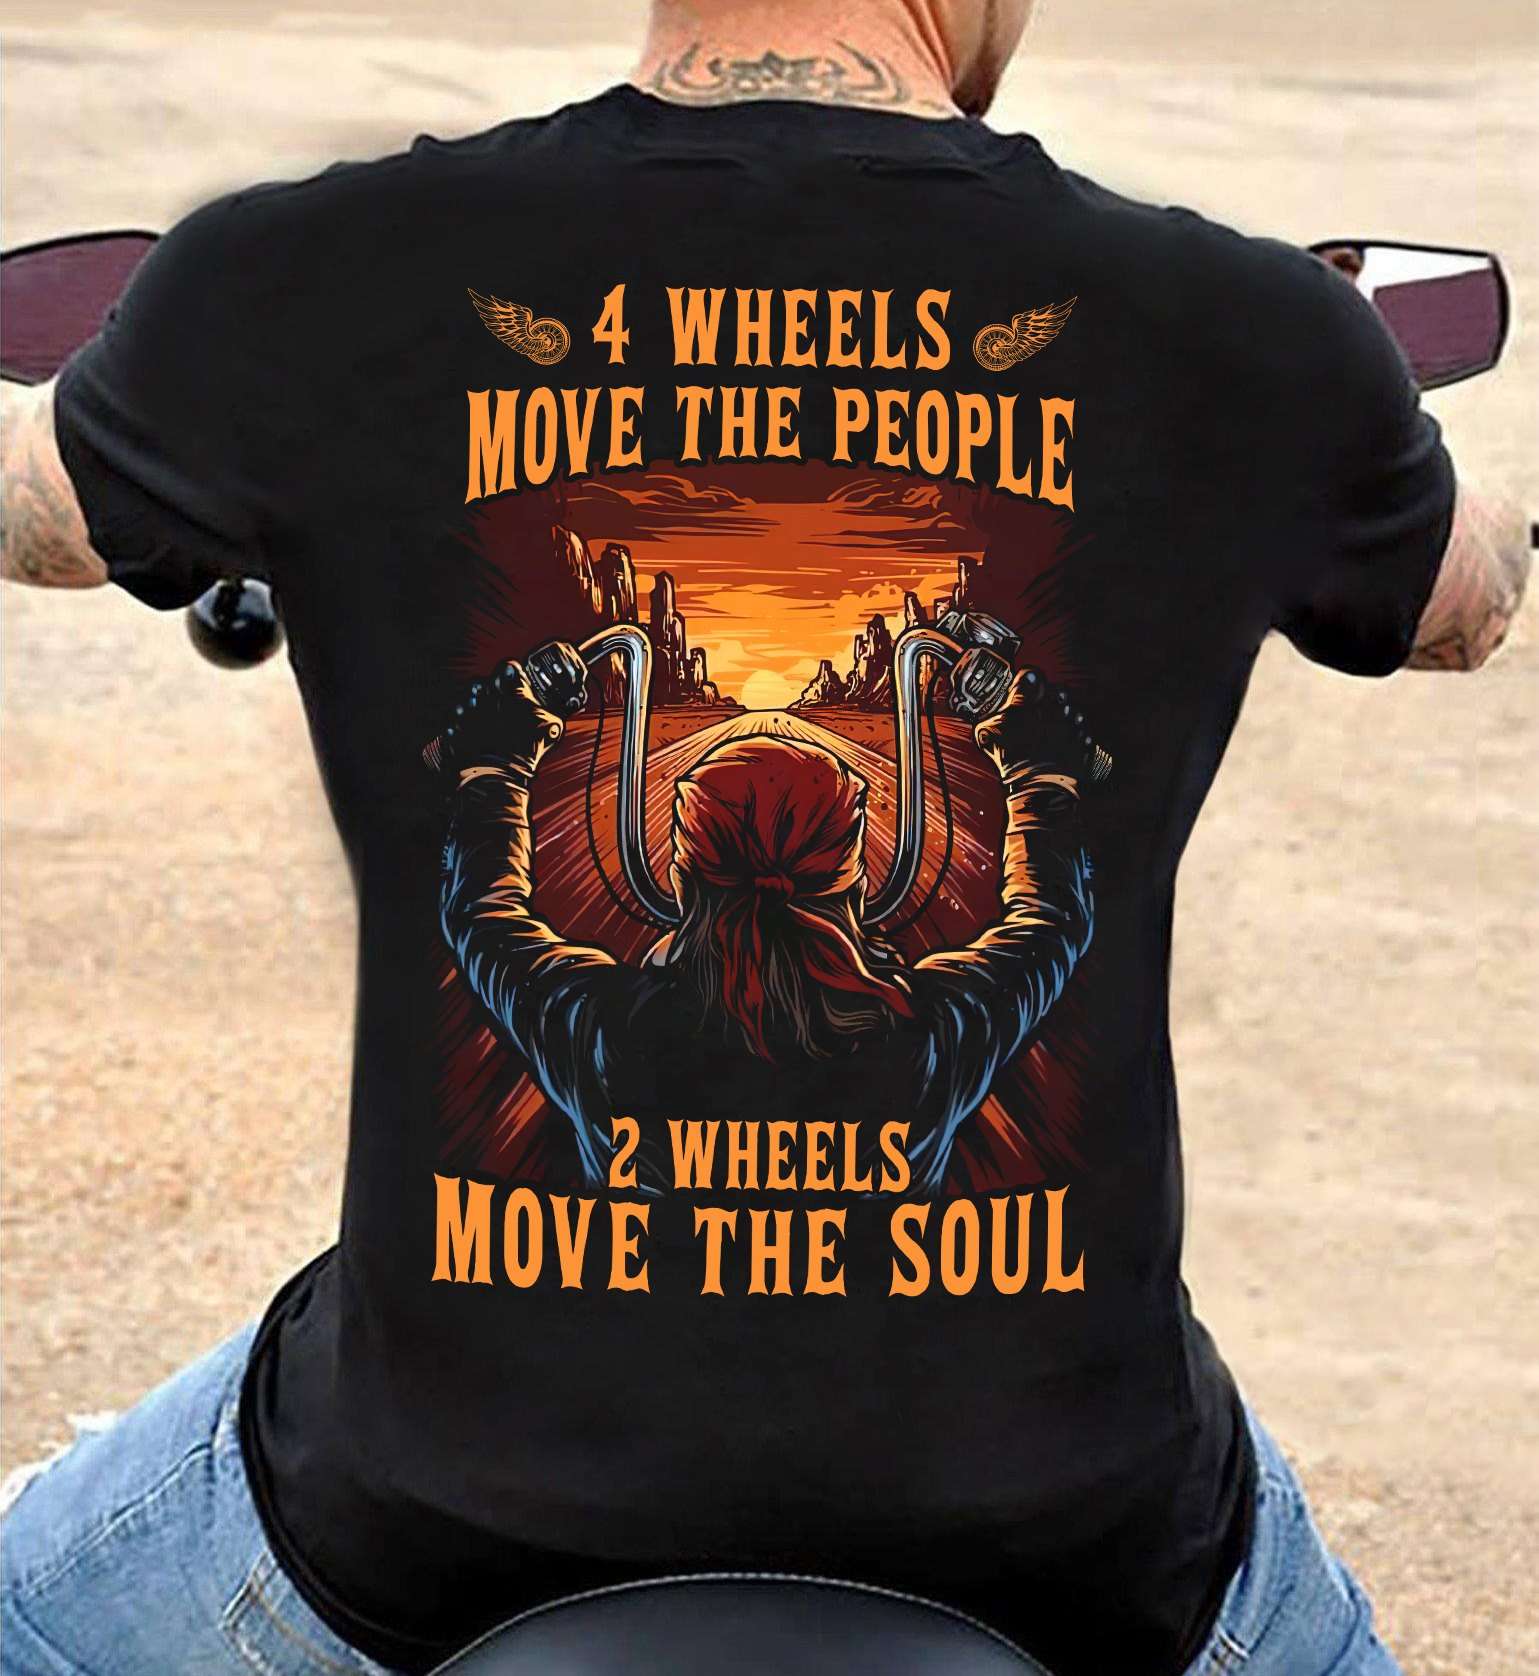 Man Riding Motorcycle At Sunset - 4 wheels move the people 2 wheels move the soul